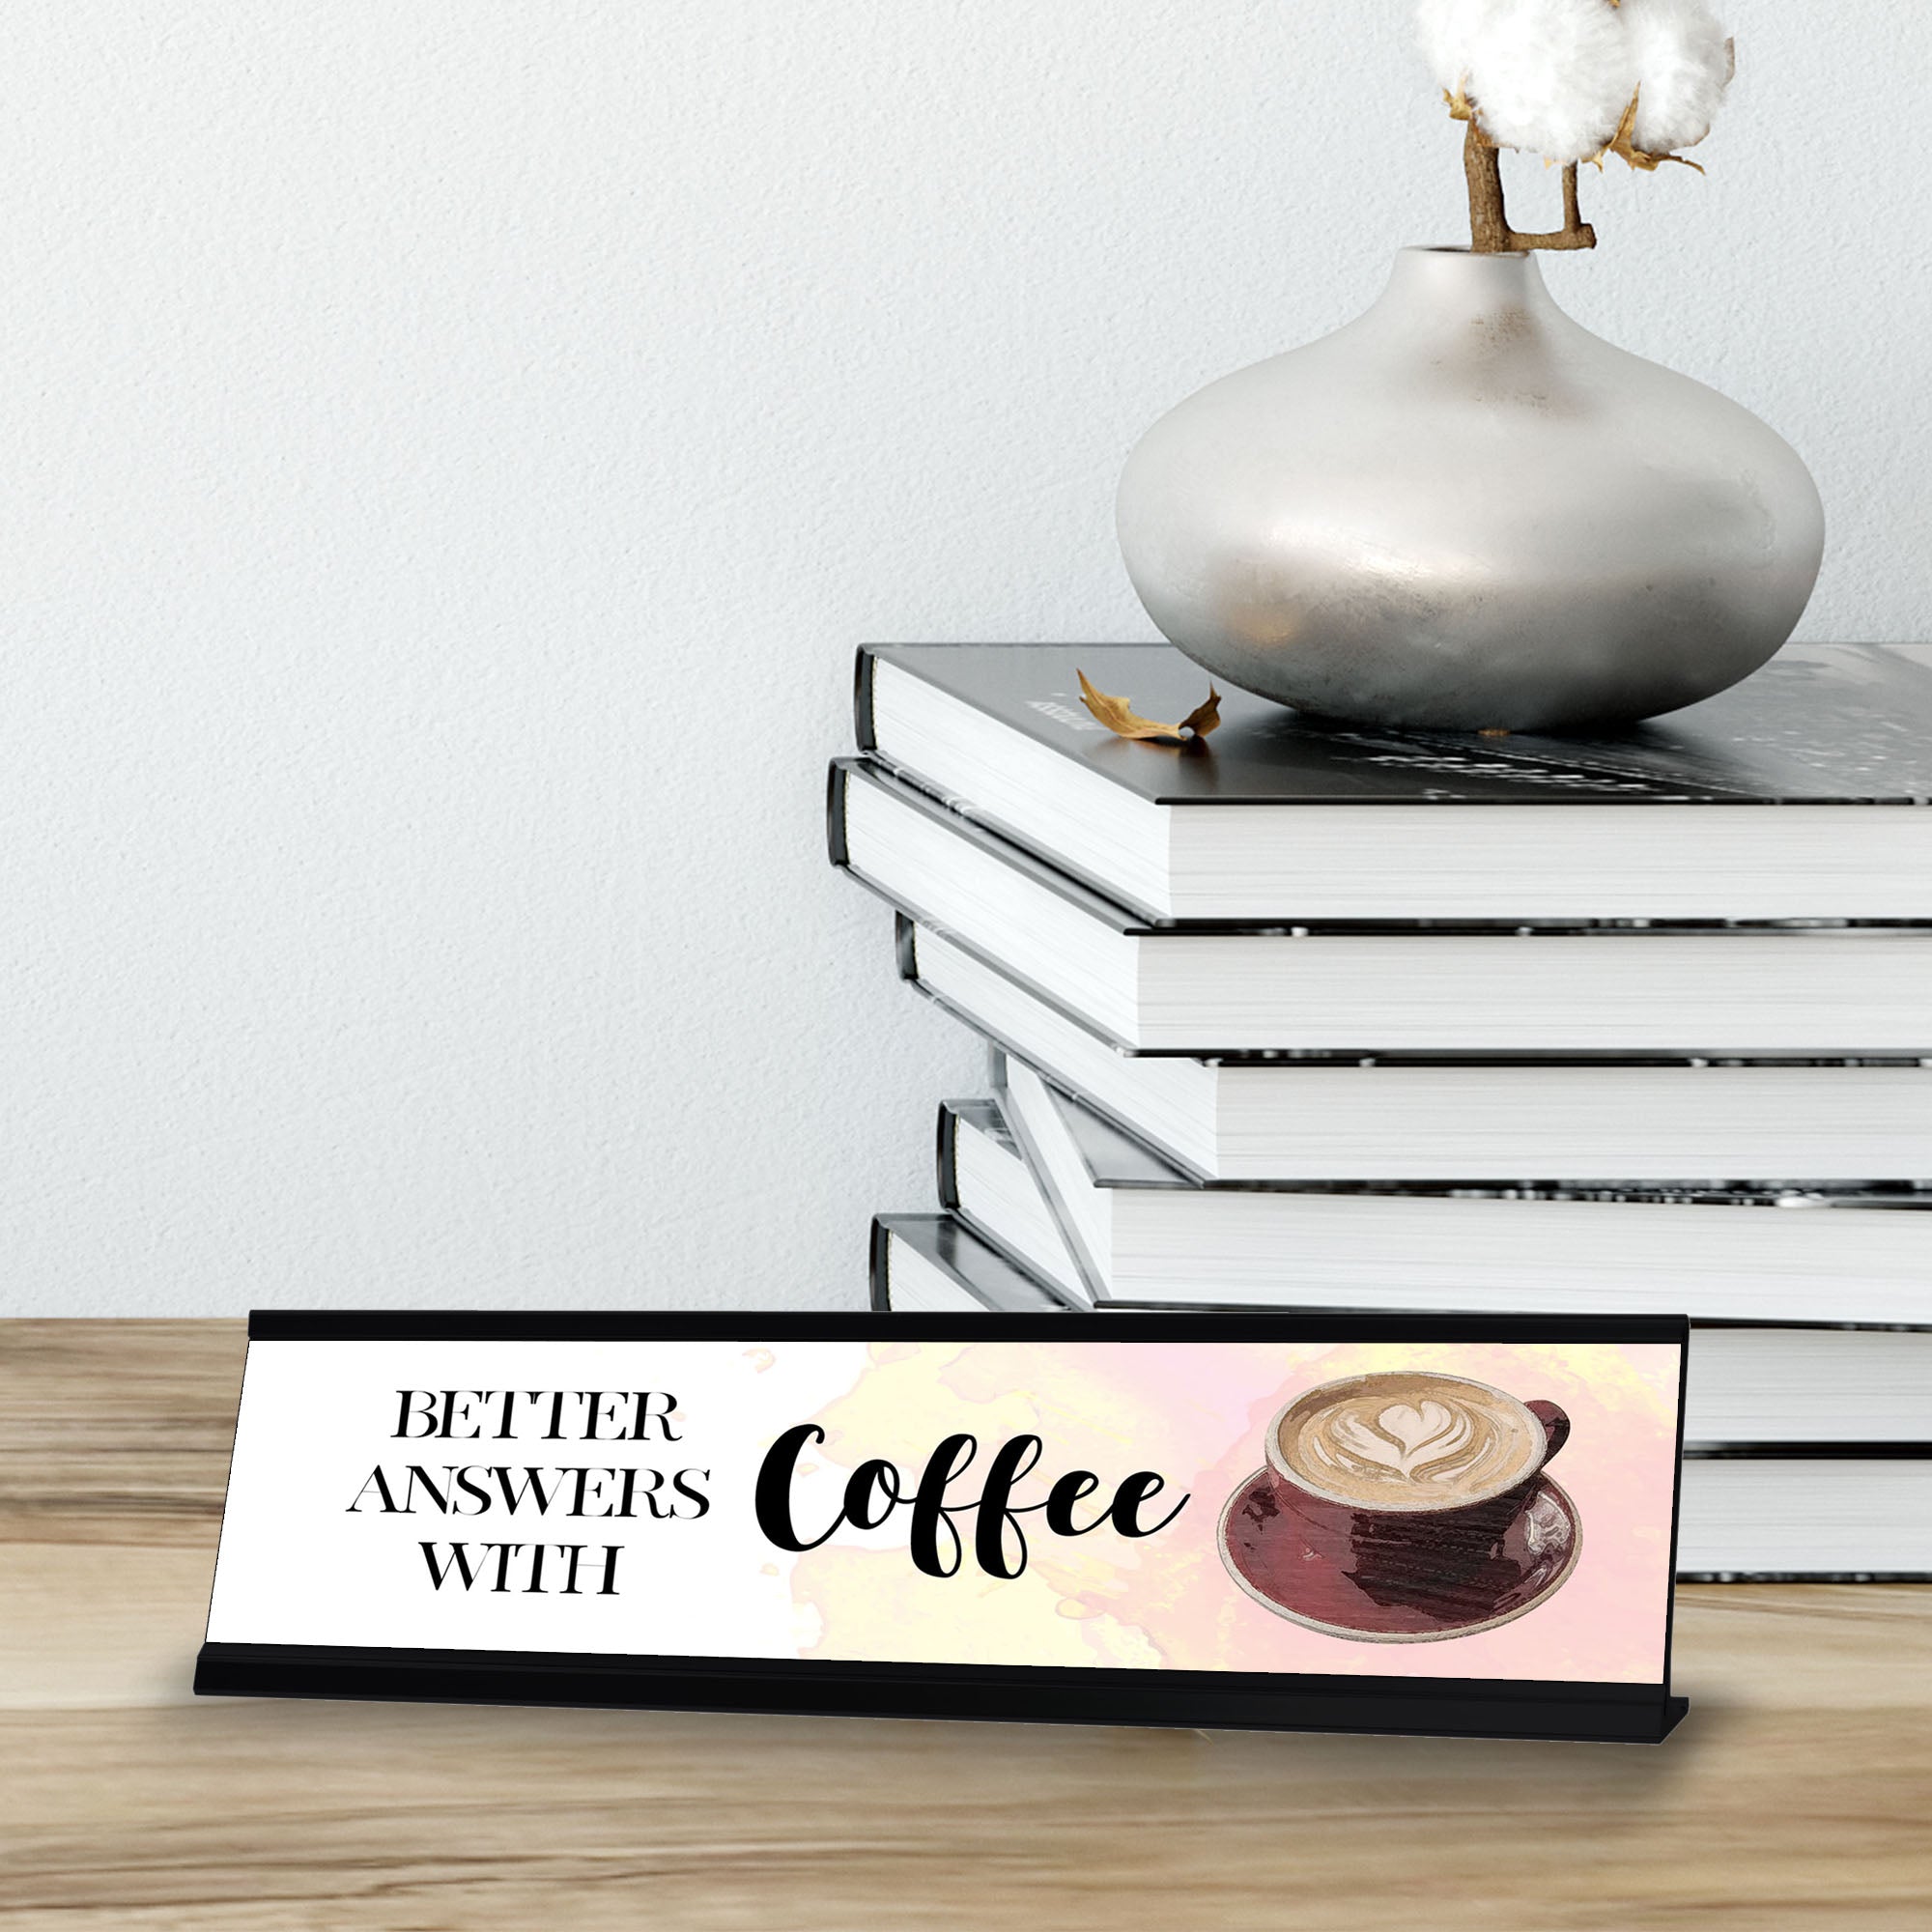 Better Answers With Coffee Desk Sign, novelty nameplate (2 x 8")